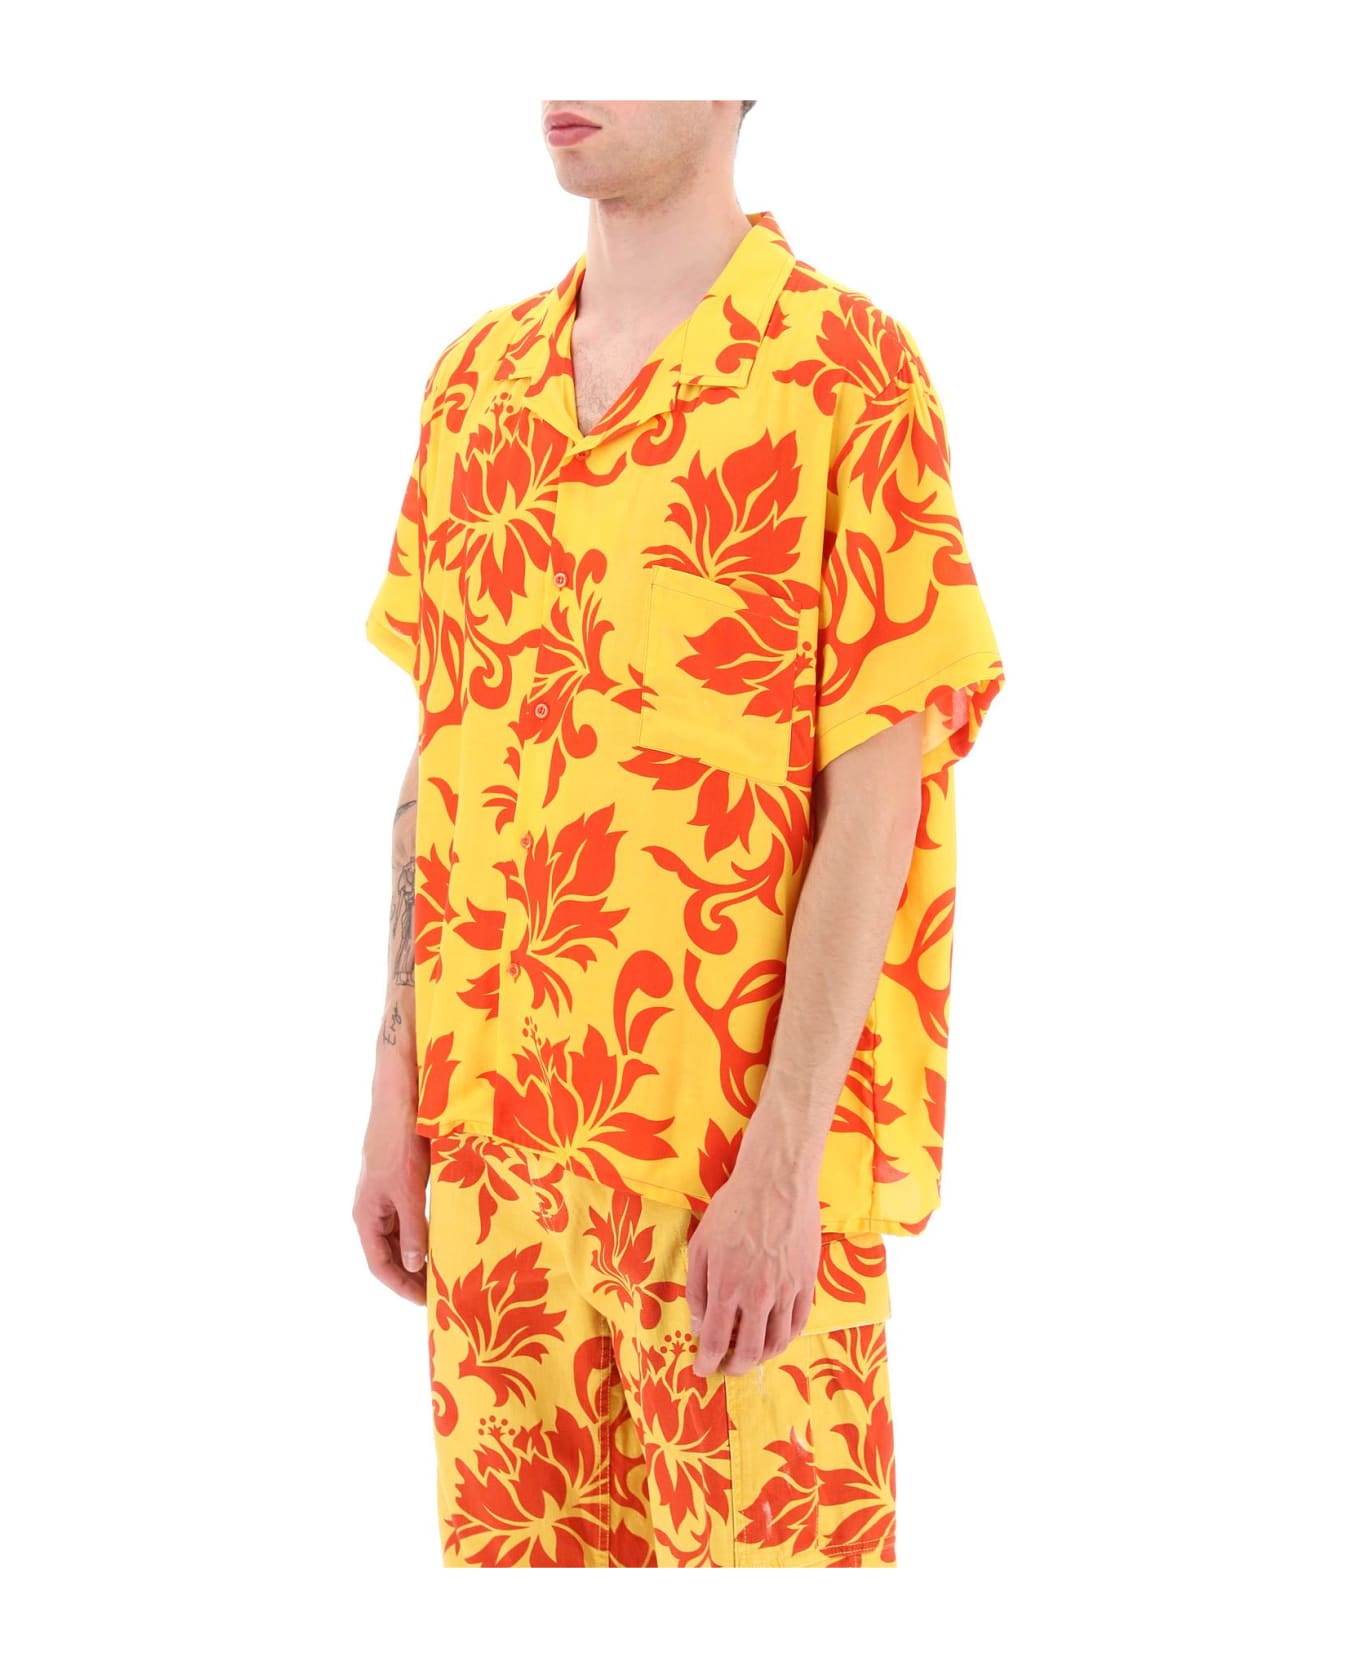 ERL Printed Viscose Bowling Shirt - ERL TROPICAL FLOWERS 1 (Yellow) シャツ